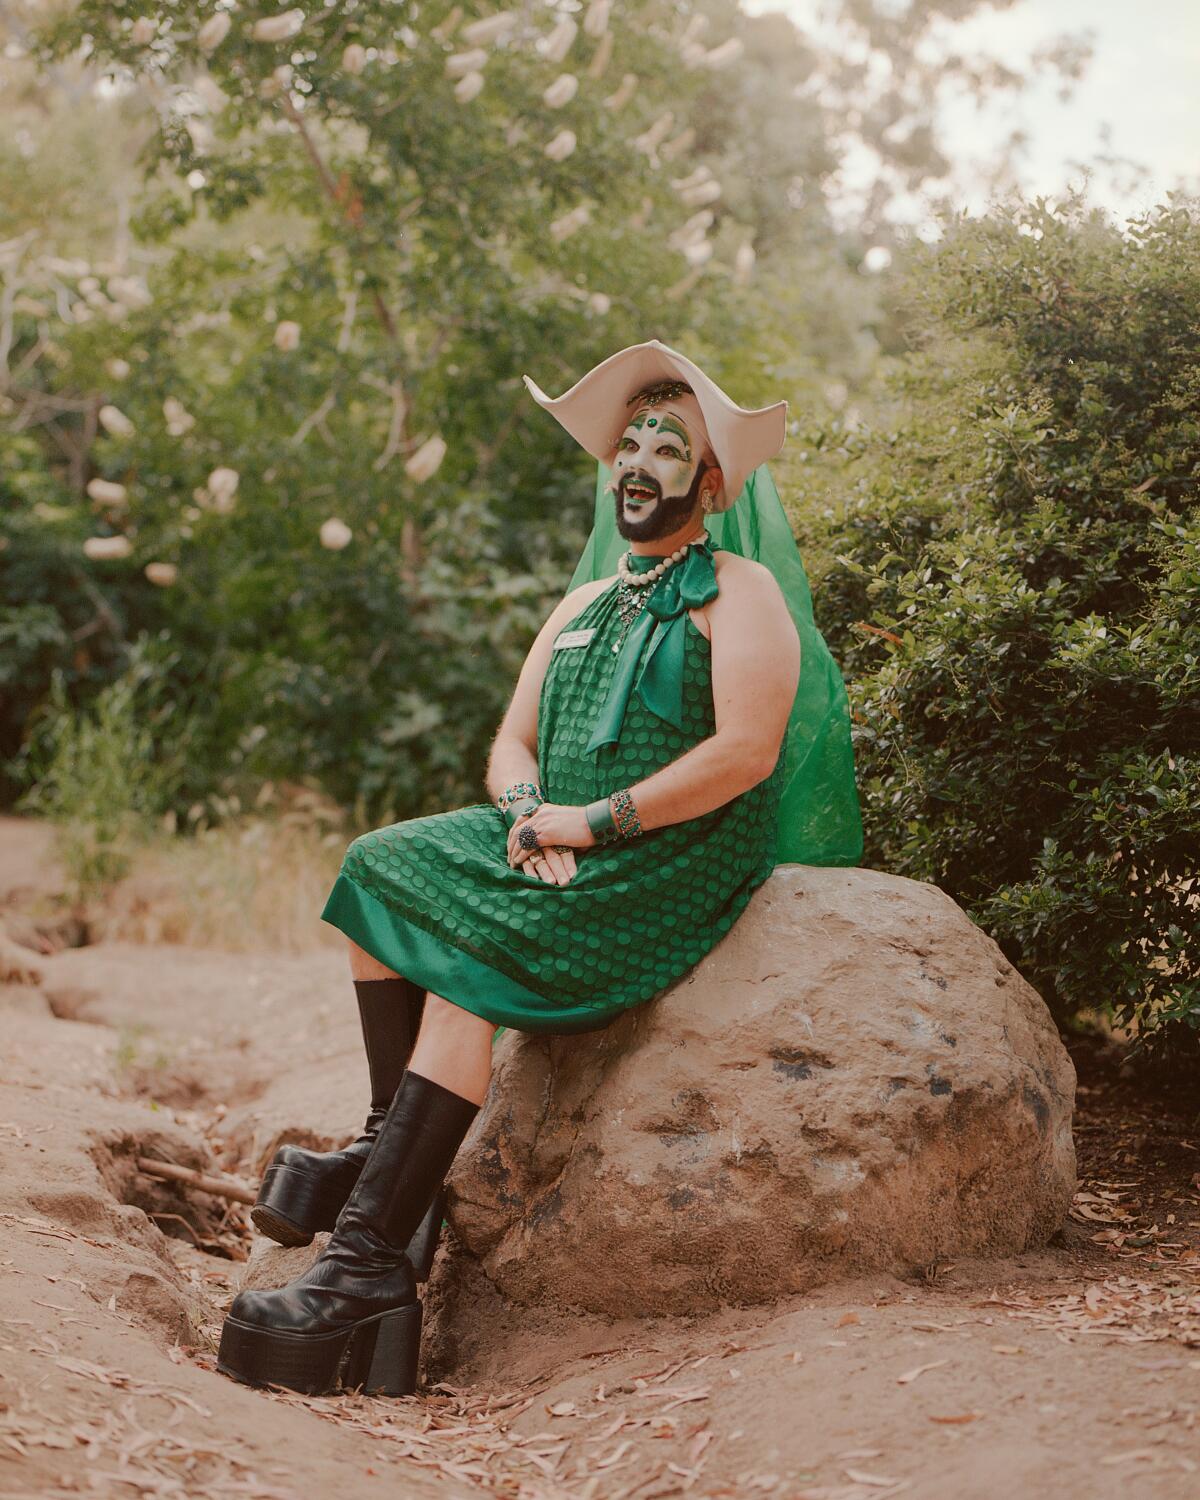 Sister Tootie Toot of the Sisters of Perpetual Indulgence at Elysian Park in Los Angeles.